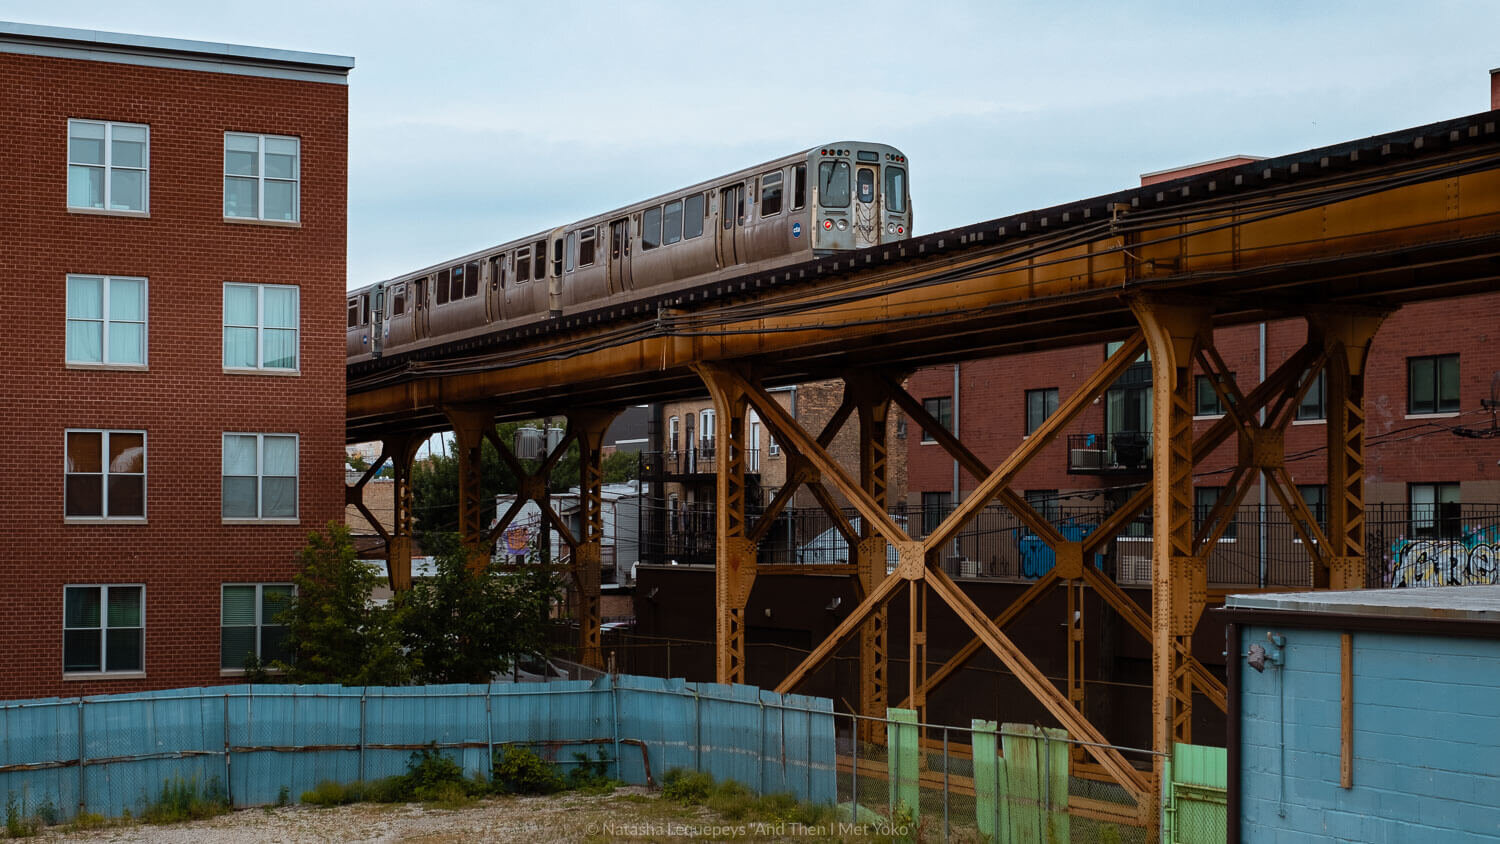 Train passes on the 606 walking path, Chicago, USA. Travel photography and guide by © Natasha Lequepeys for "And Then I Met Yoko". #chicago #usa #travelblog #travelphotography